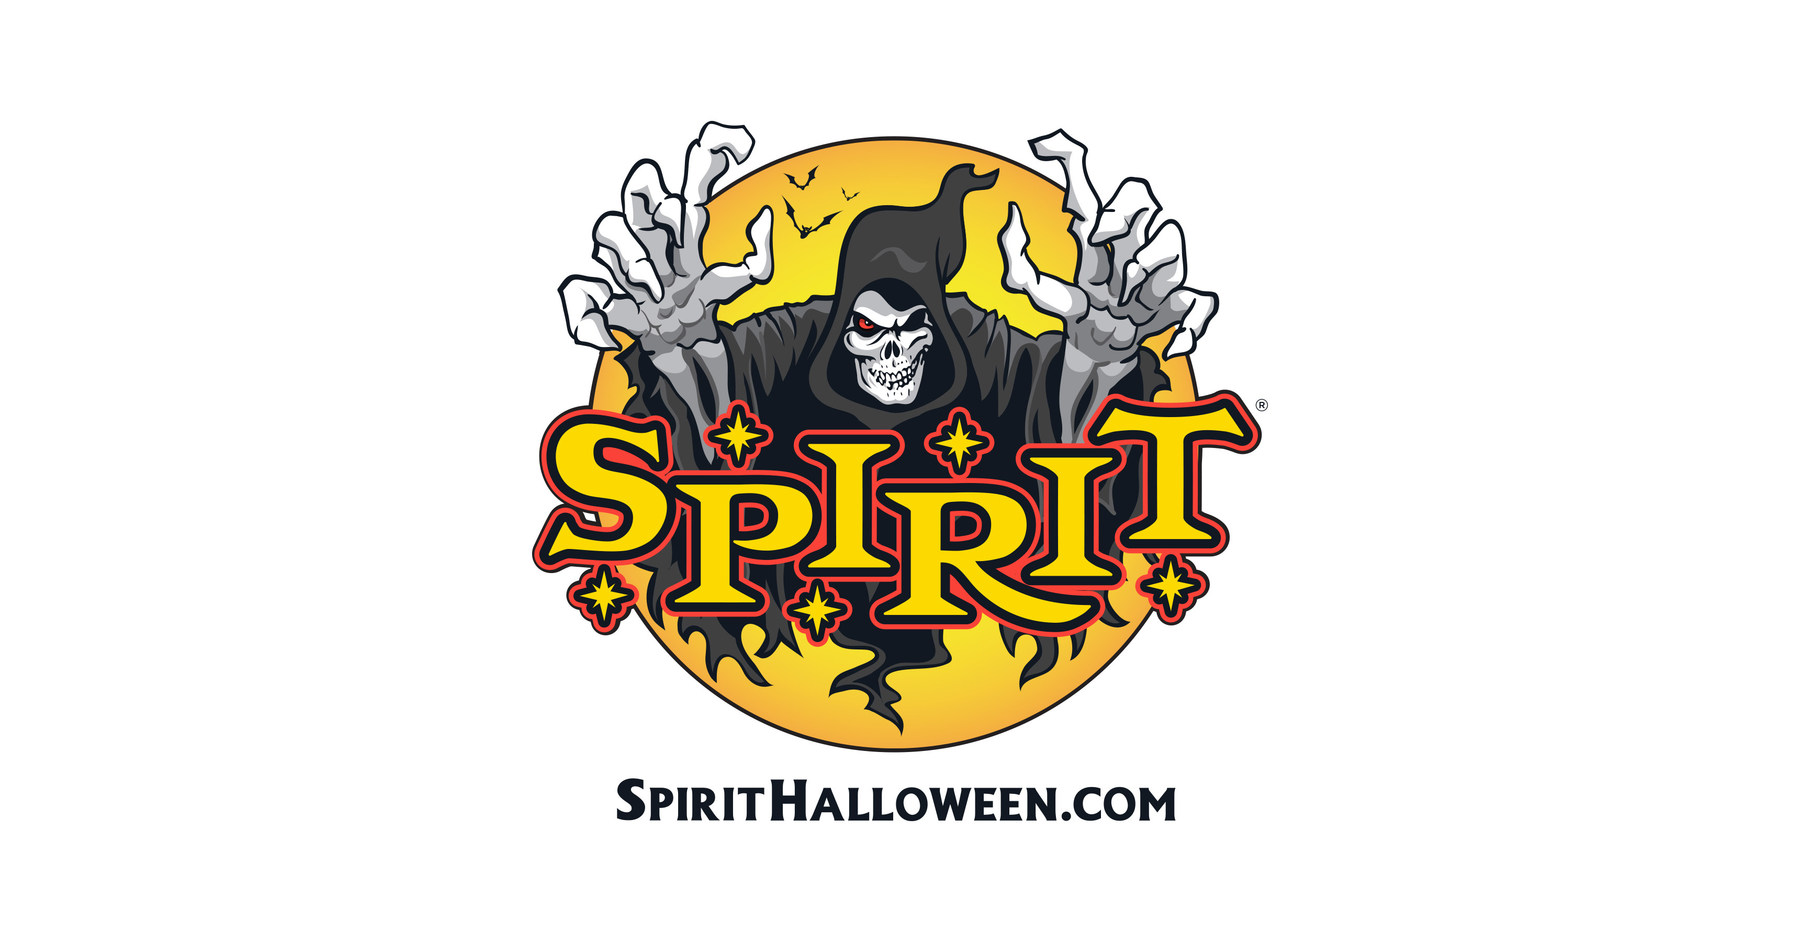 Spirit Halloween Jobs Come With Irresistible Perks for the